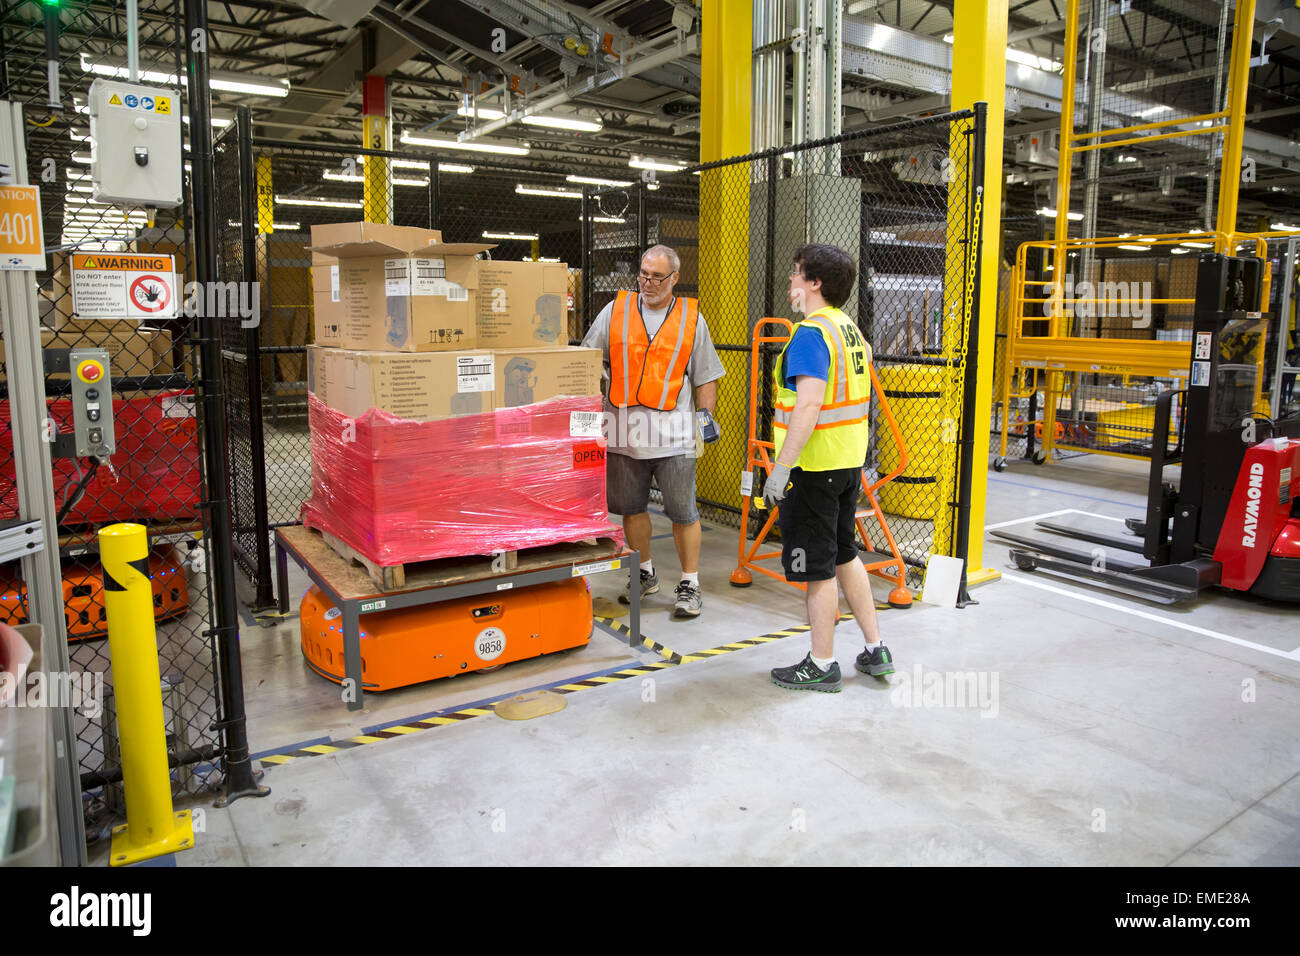 Amazon.com employees scan barcodes on pallet with packages in warehouse Stock Photo